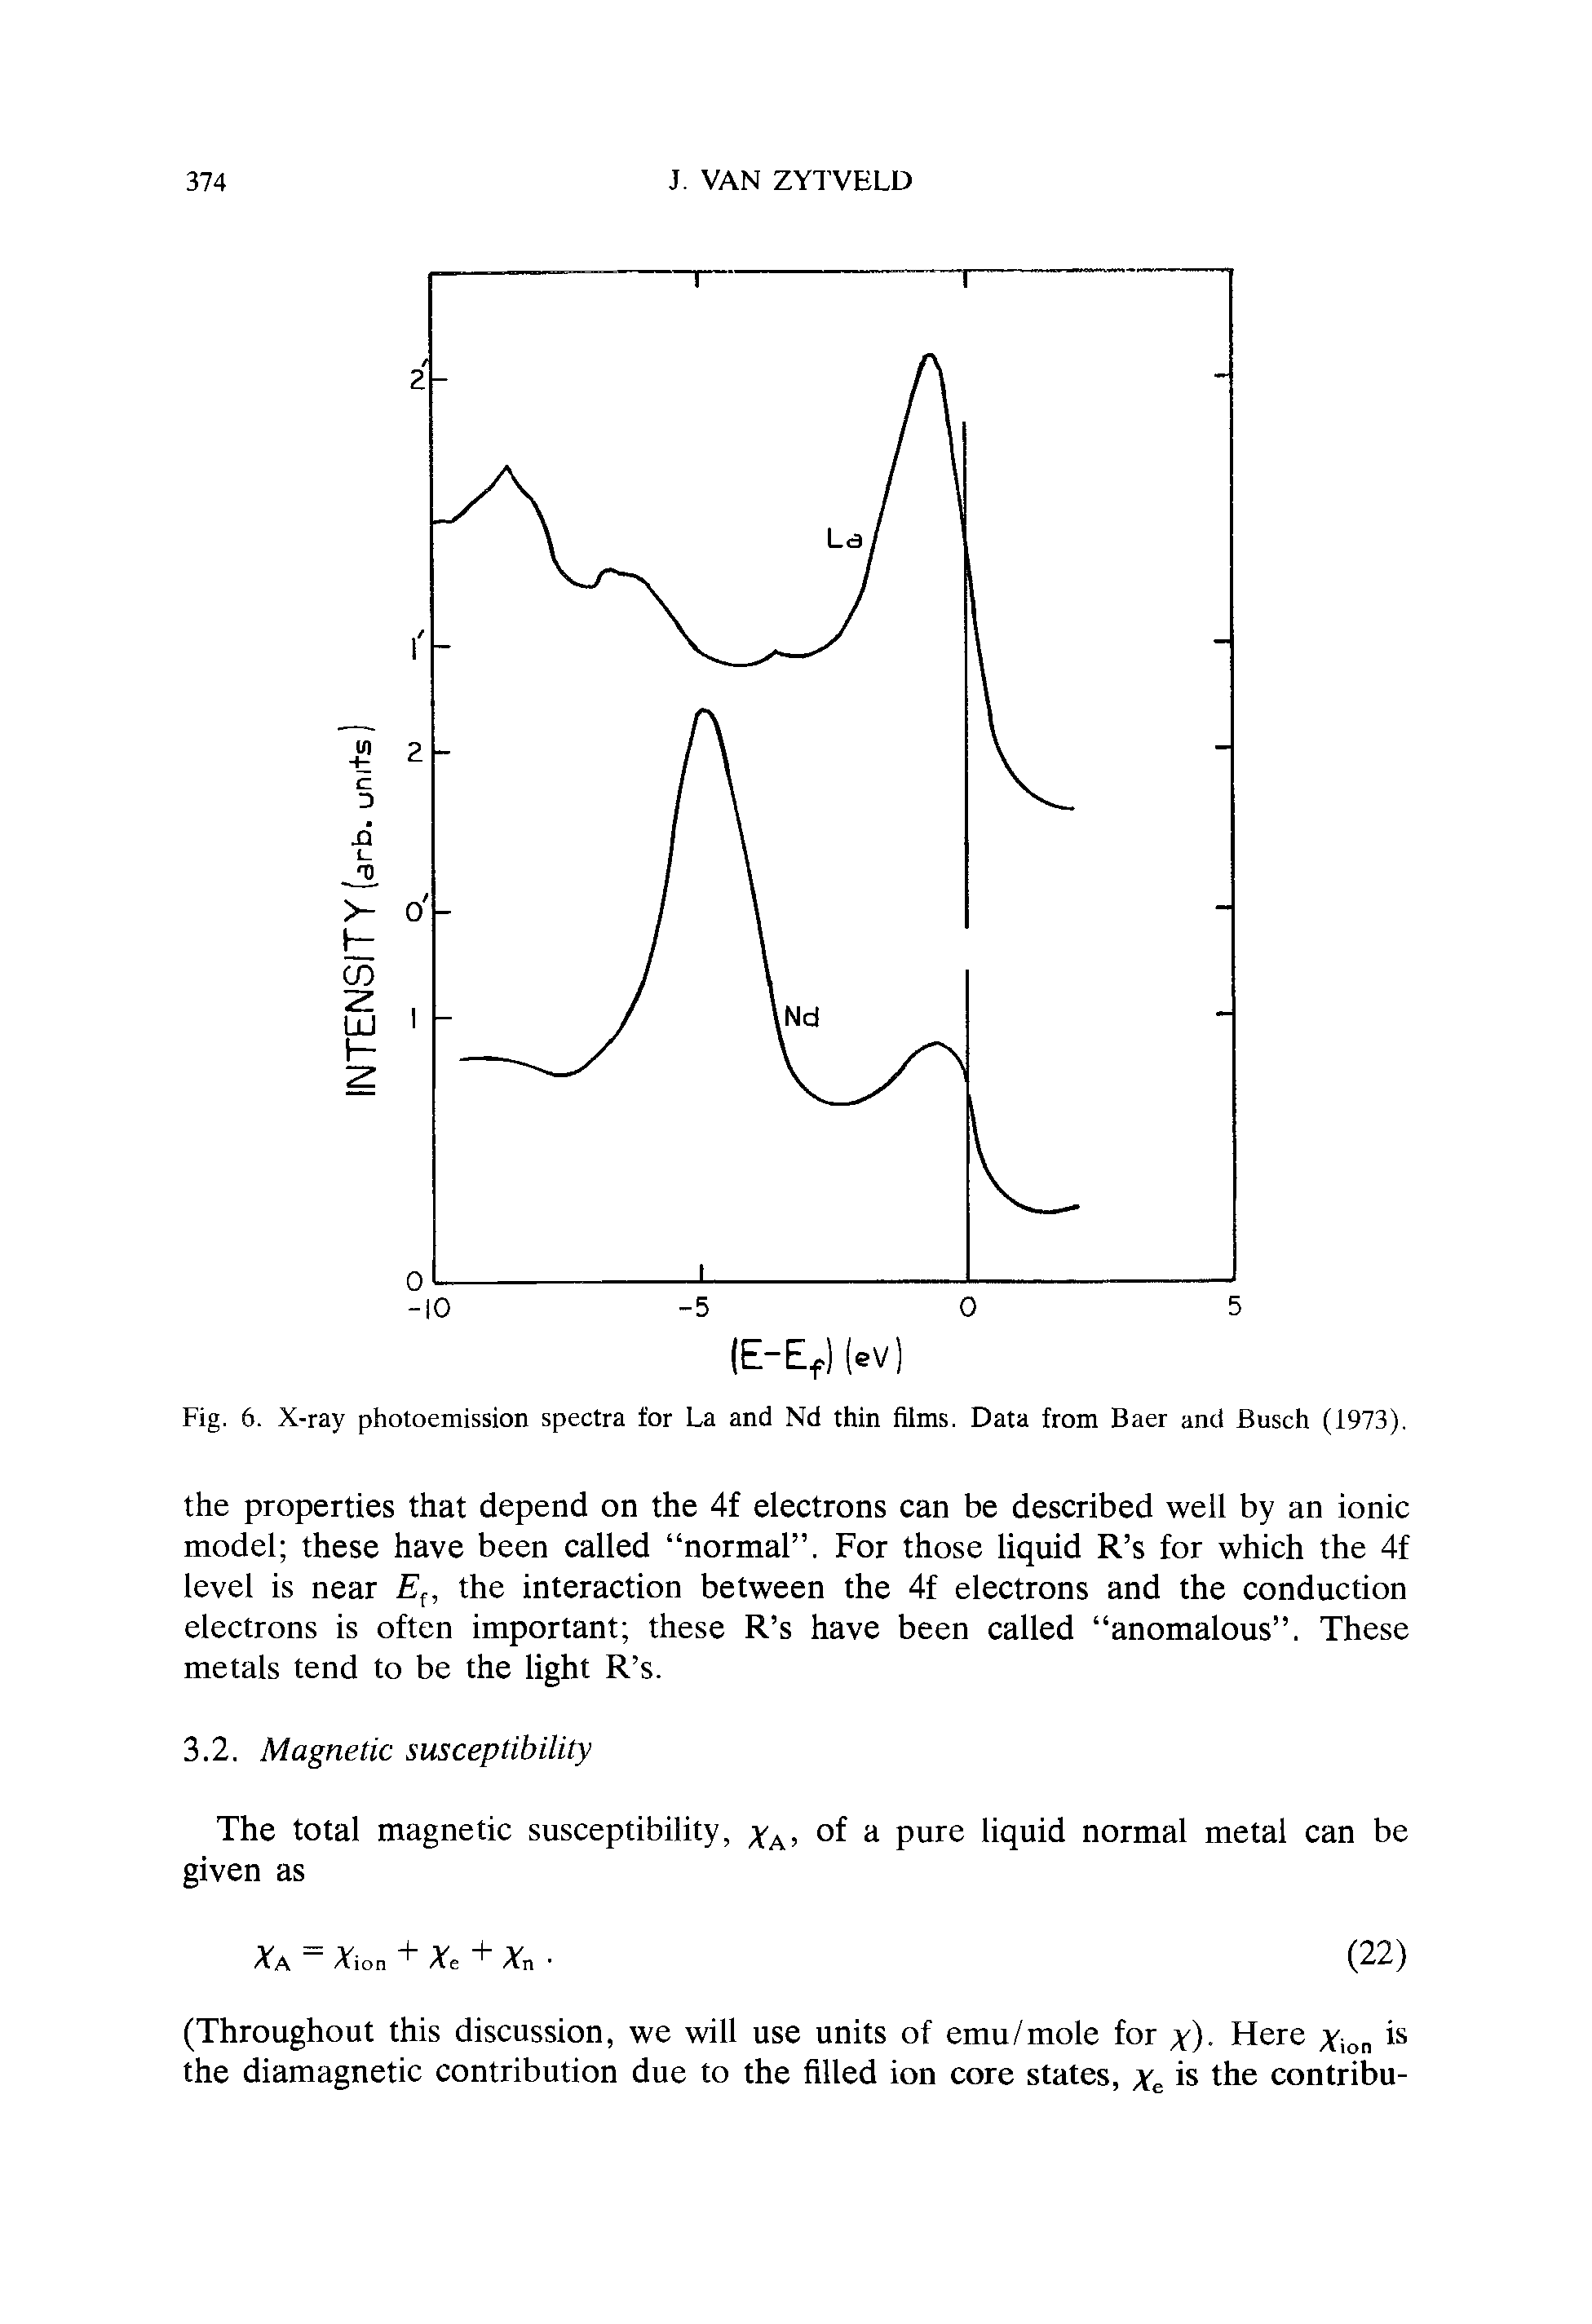 Fig. 6. X-ray photoemission spectra for La and Nd thin films. Data from Baer and Busch (1973).